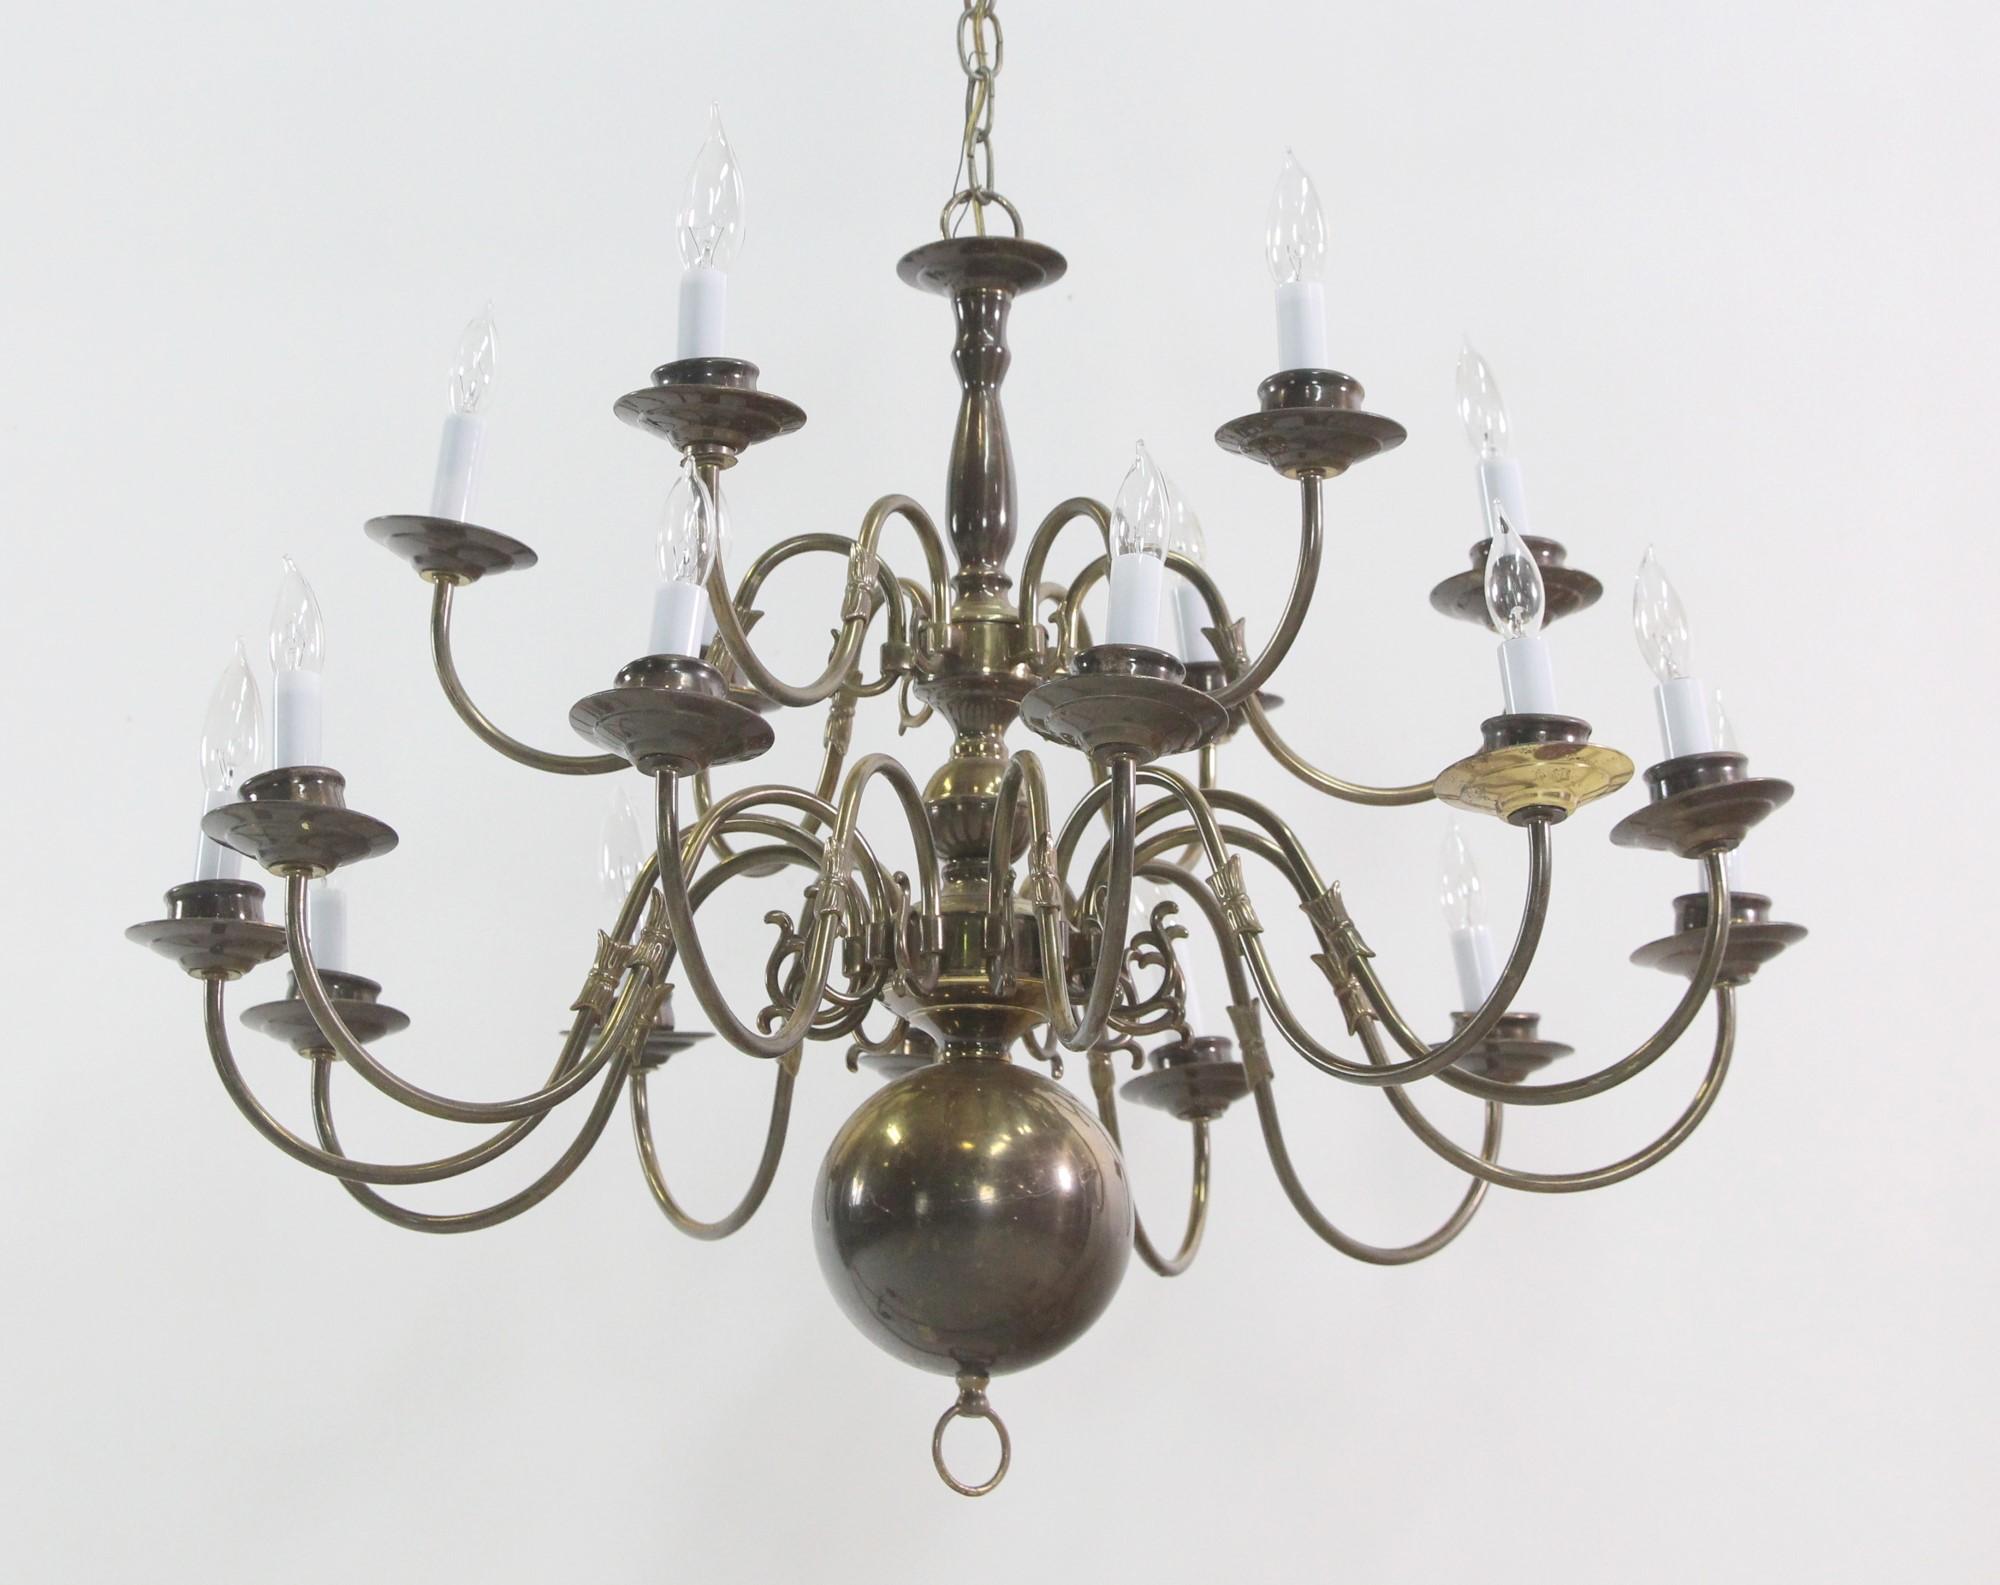 American Early 1900s Brass Williamsburg Style Chandelier with 18 Arms and Lights